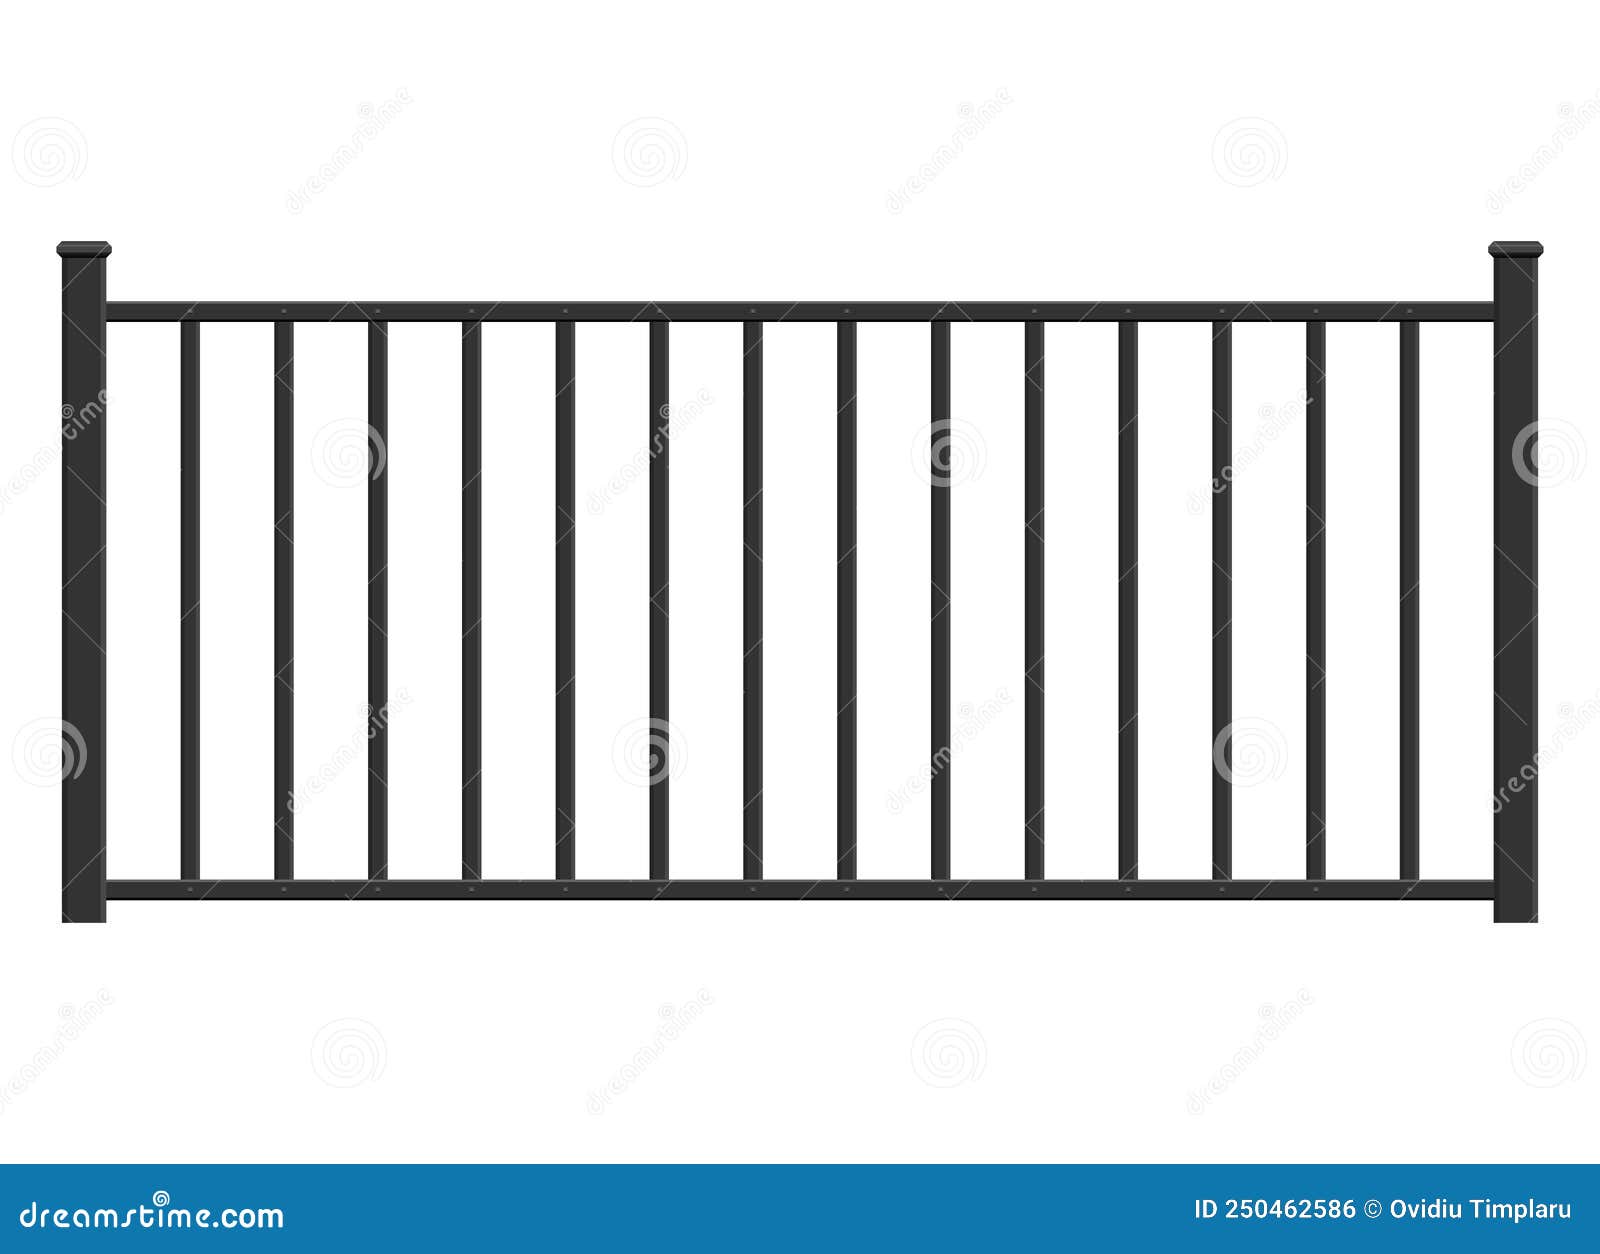 Realistic Steel Fence Vector Illustration Isolated on White Stock ...